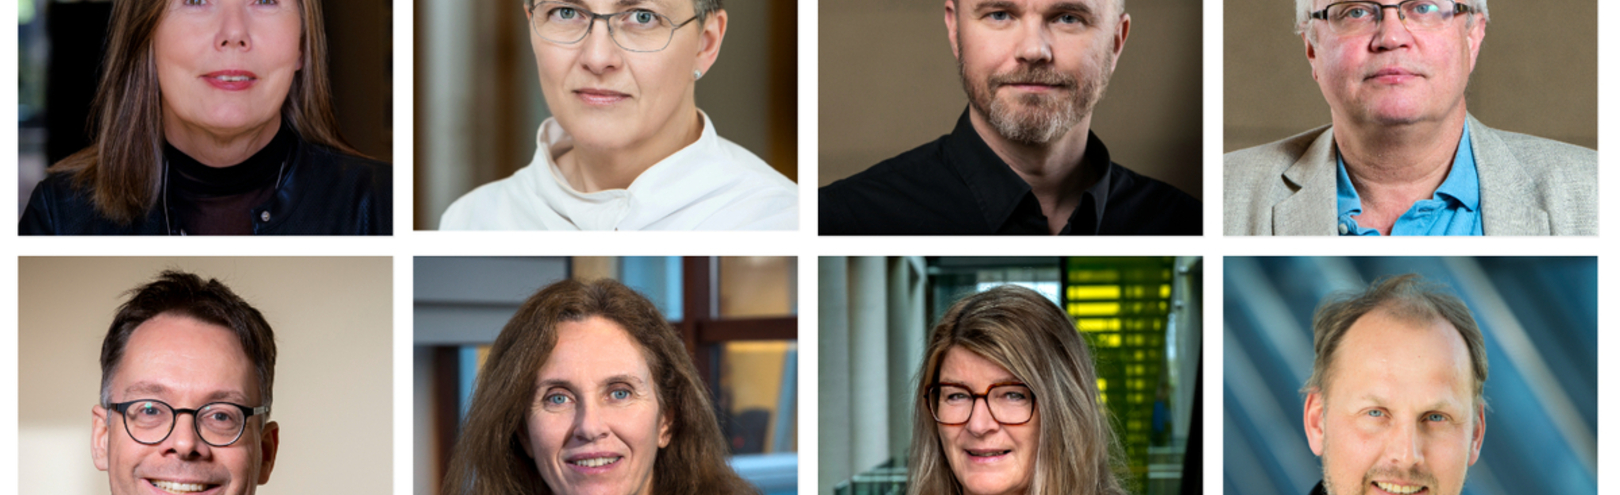 New Deans of Schools and heads of faculty take office - Available at University of Iceland